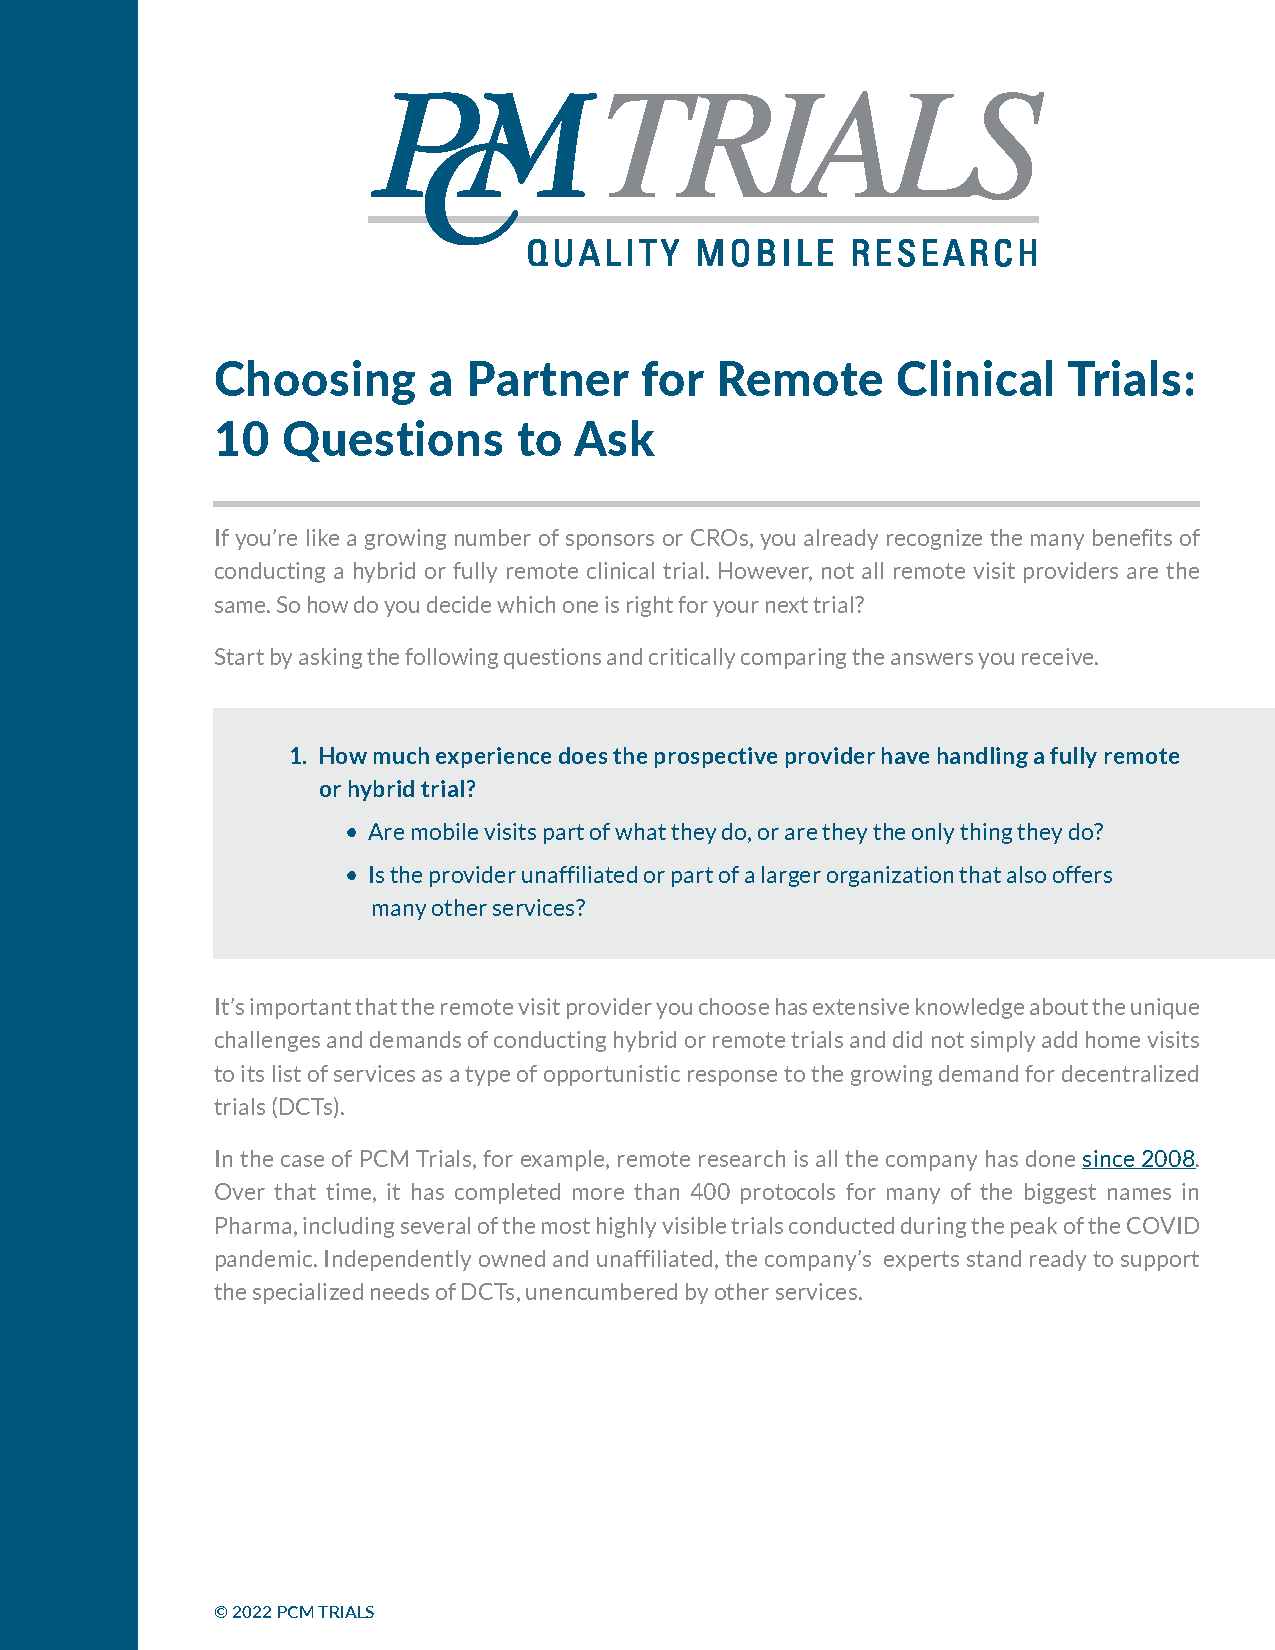 Choosing a Partner for Remote Clinical Trials: 10 Questions to Ask
